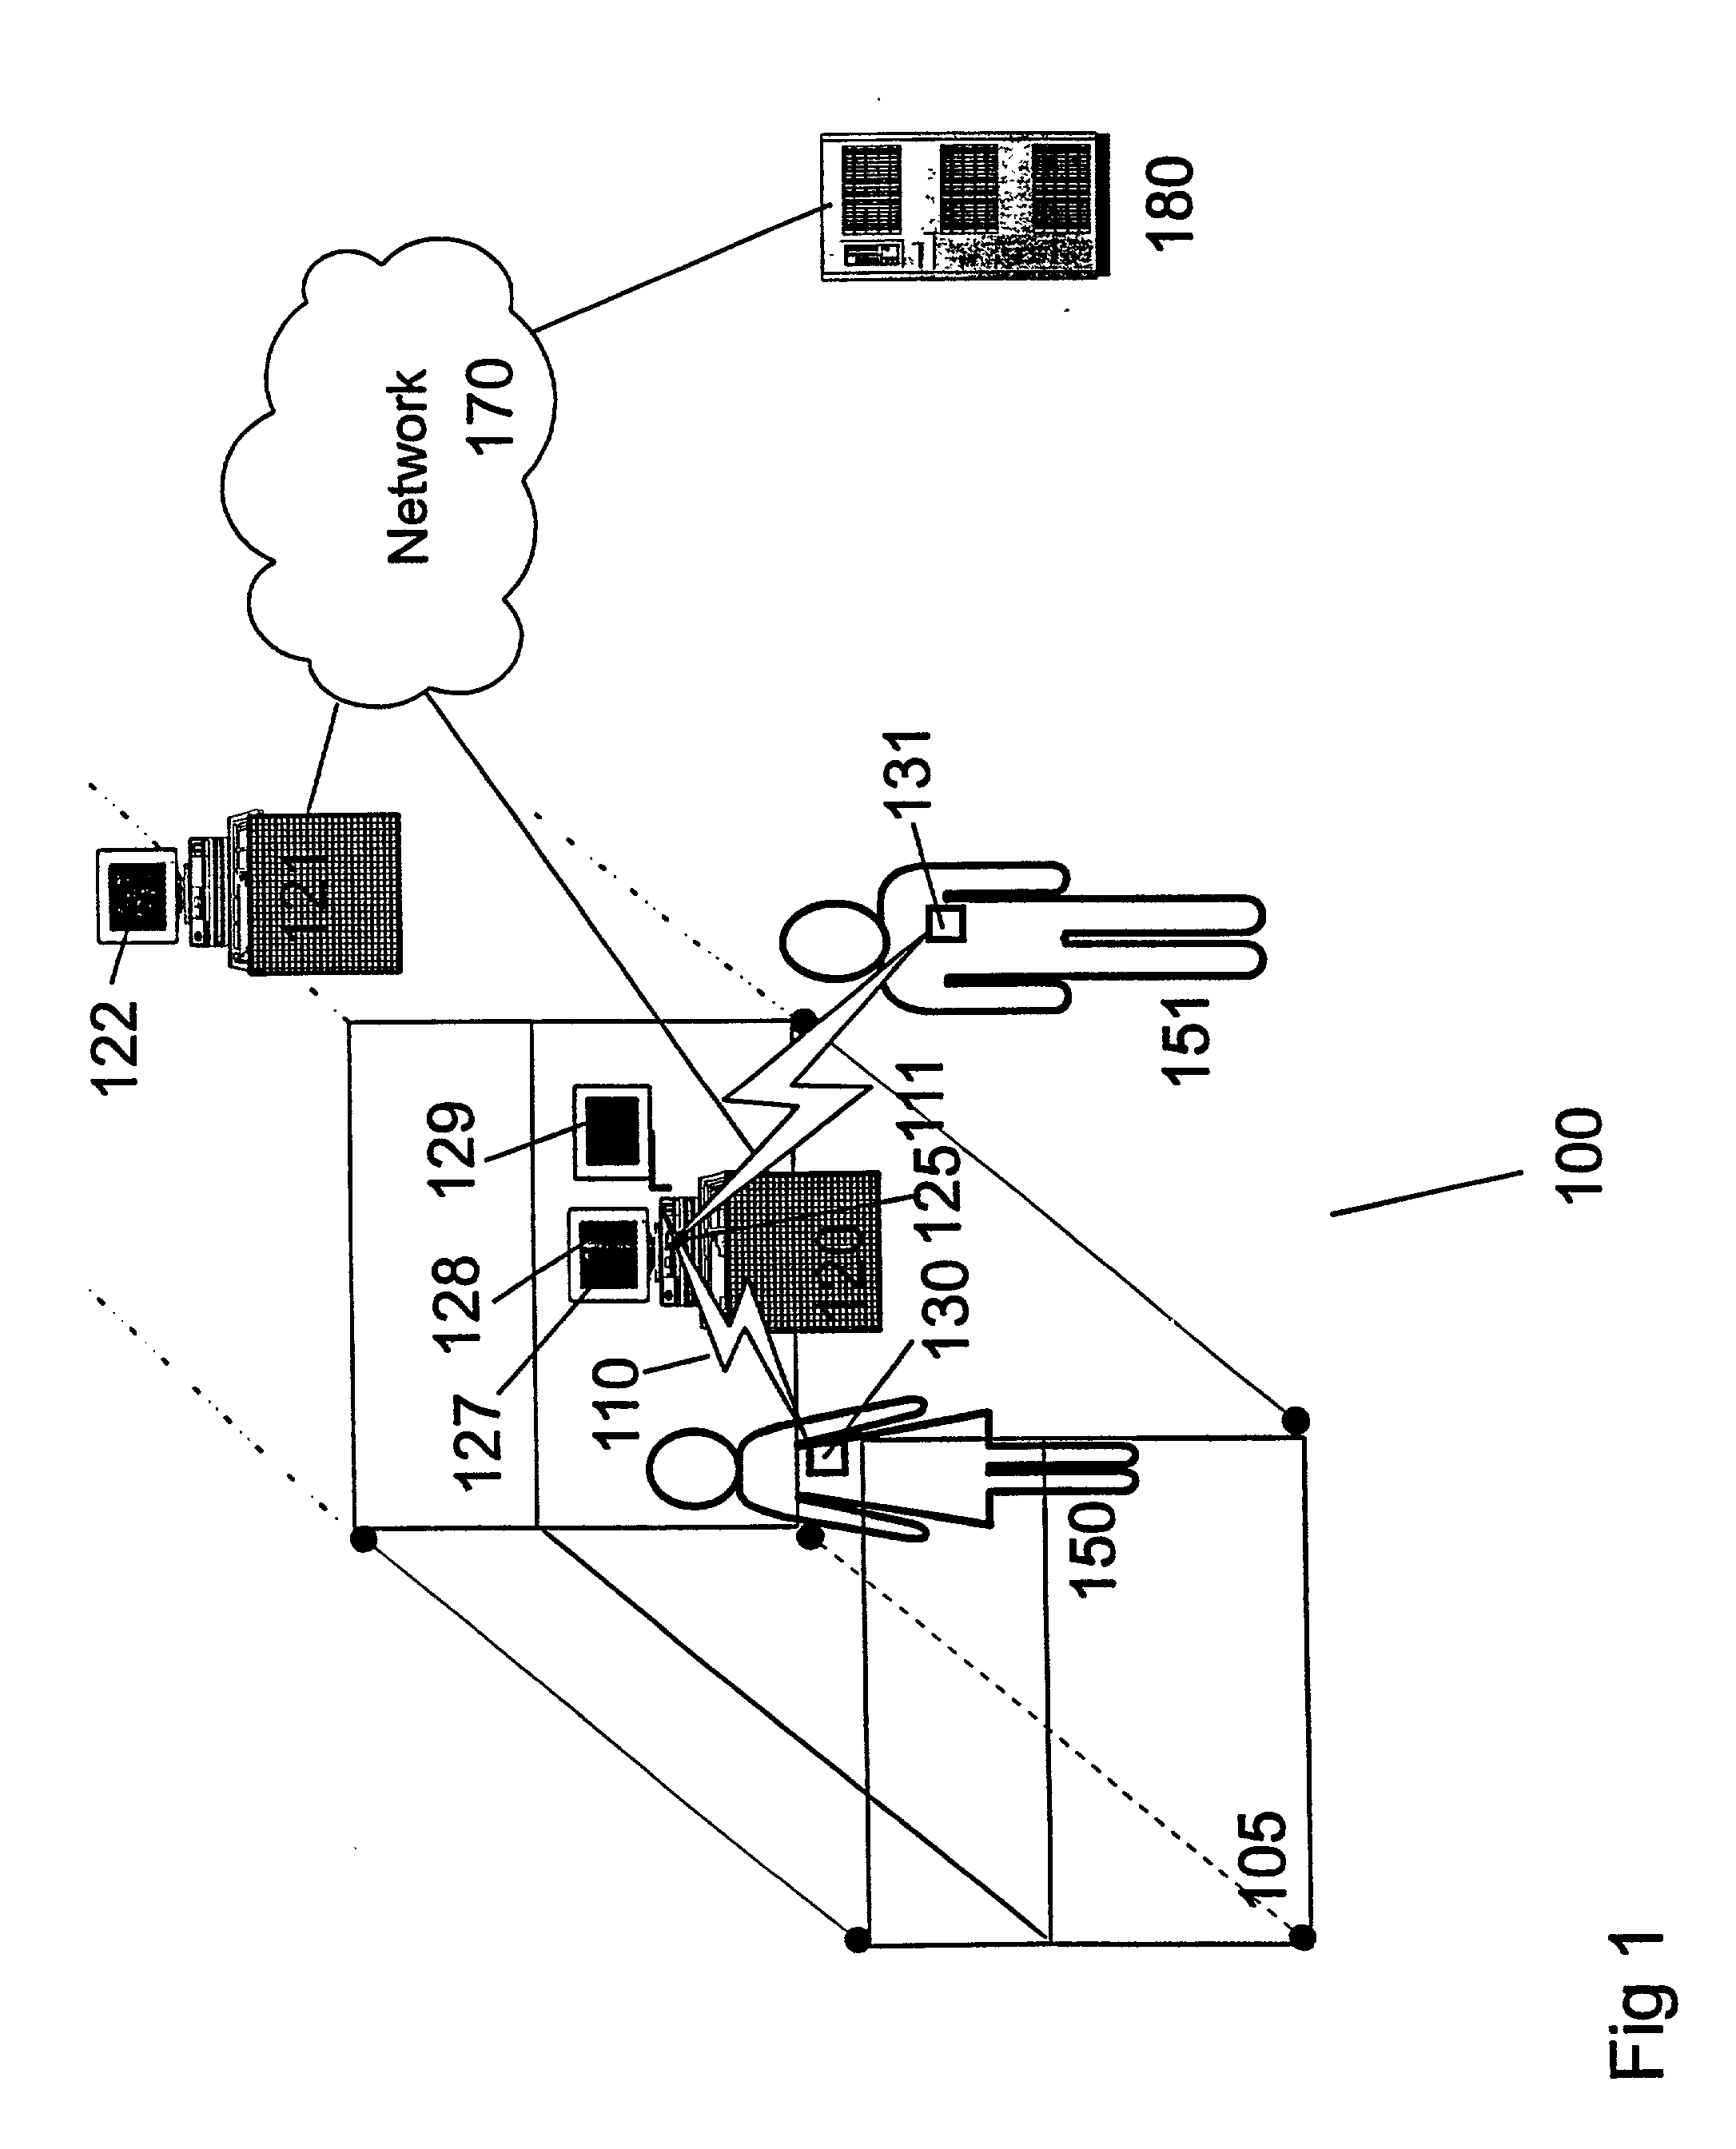 Method and system for managing the presentation of information